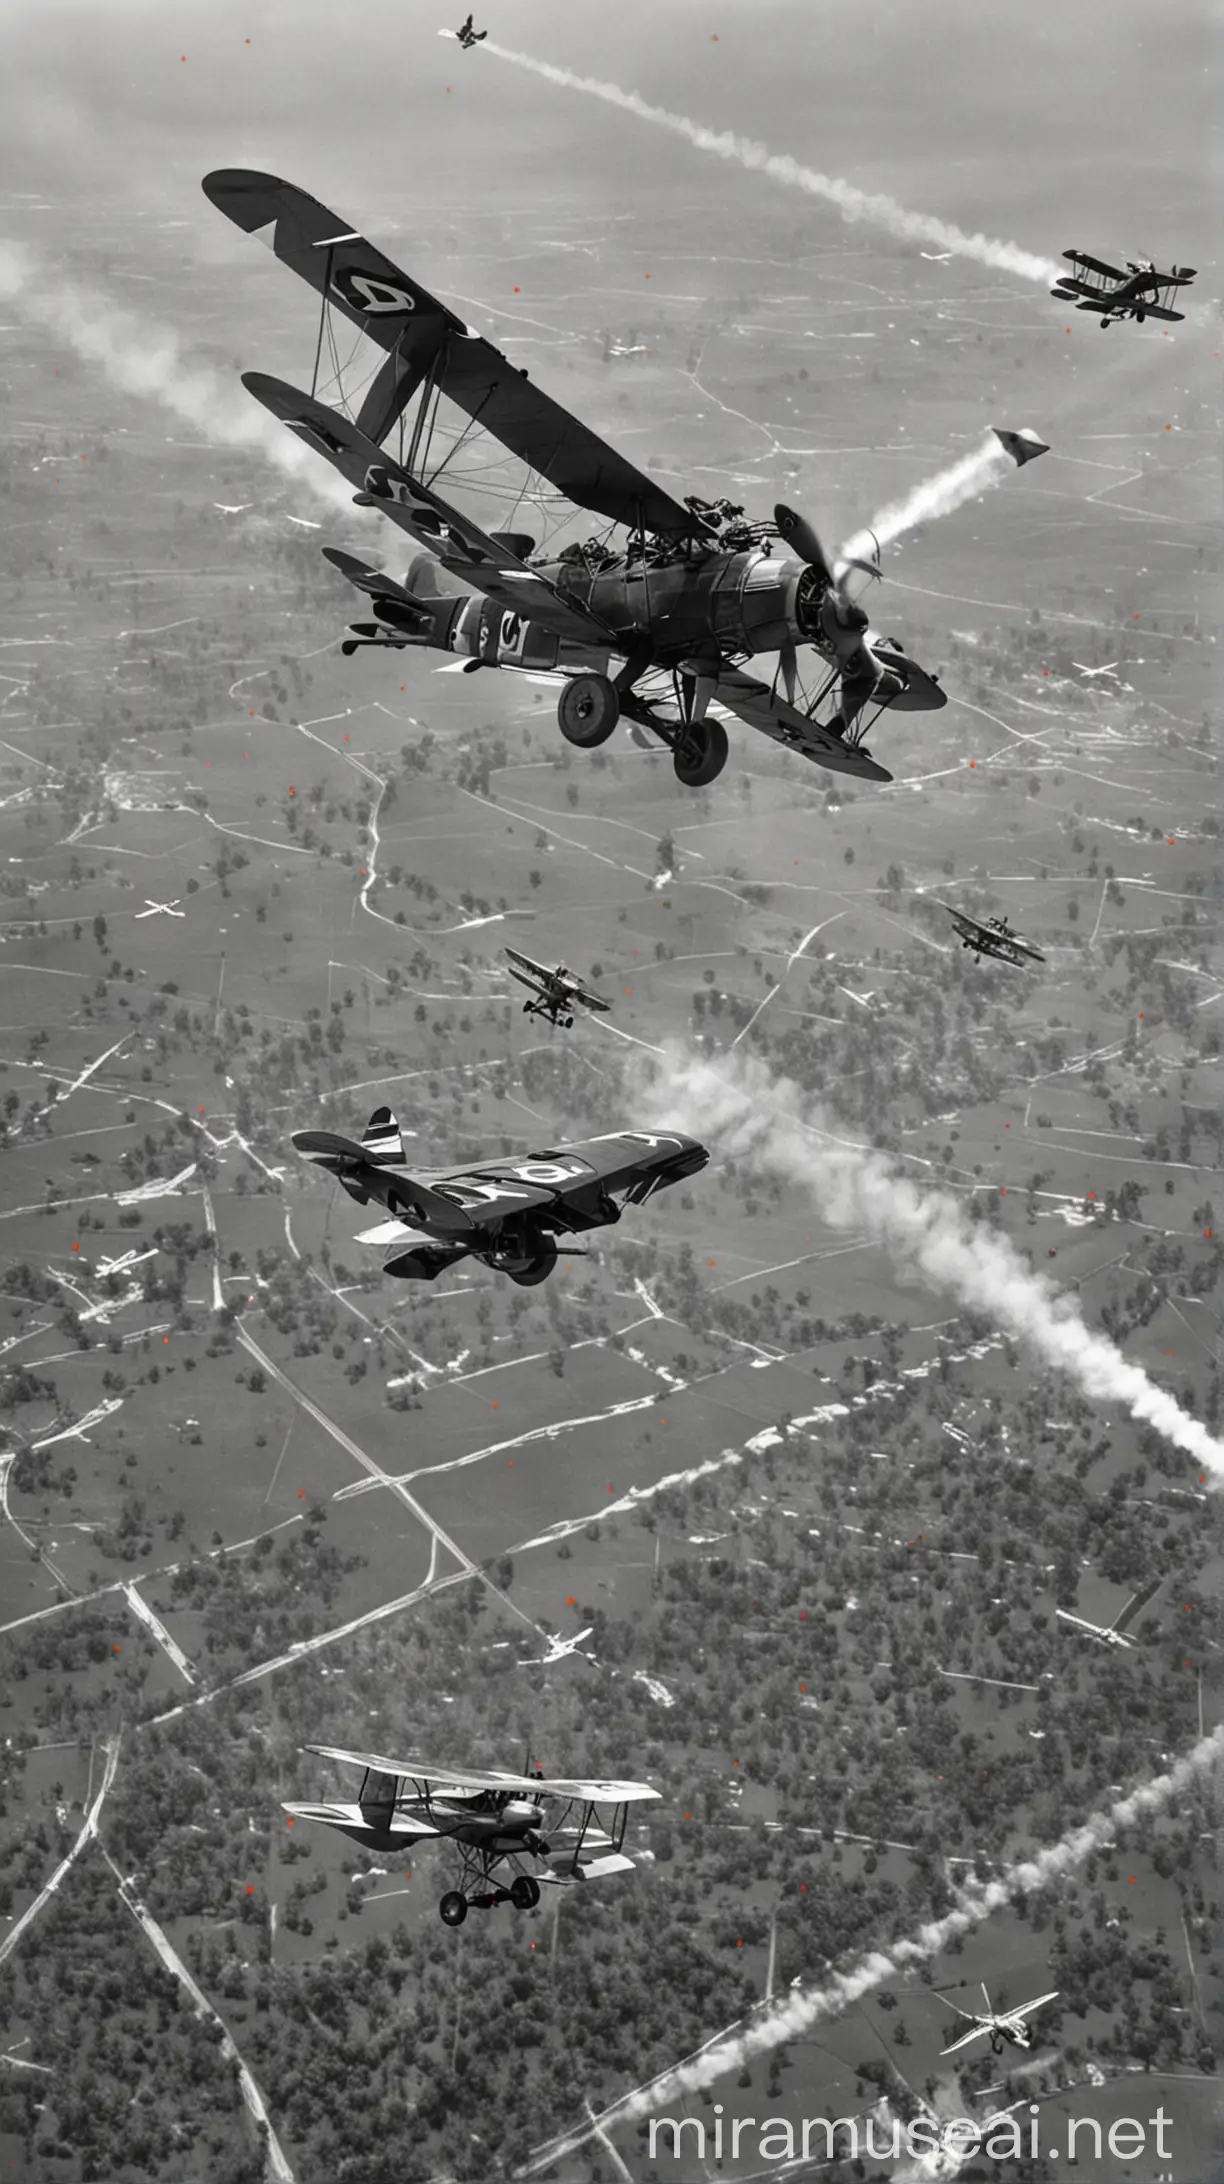 The biplanes avoiding radar detection and flying undetected over enemy lines. hyper realistic